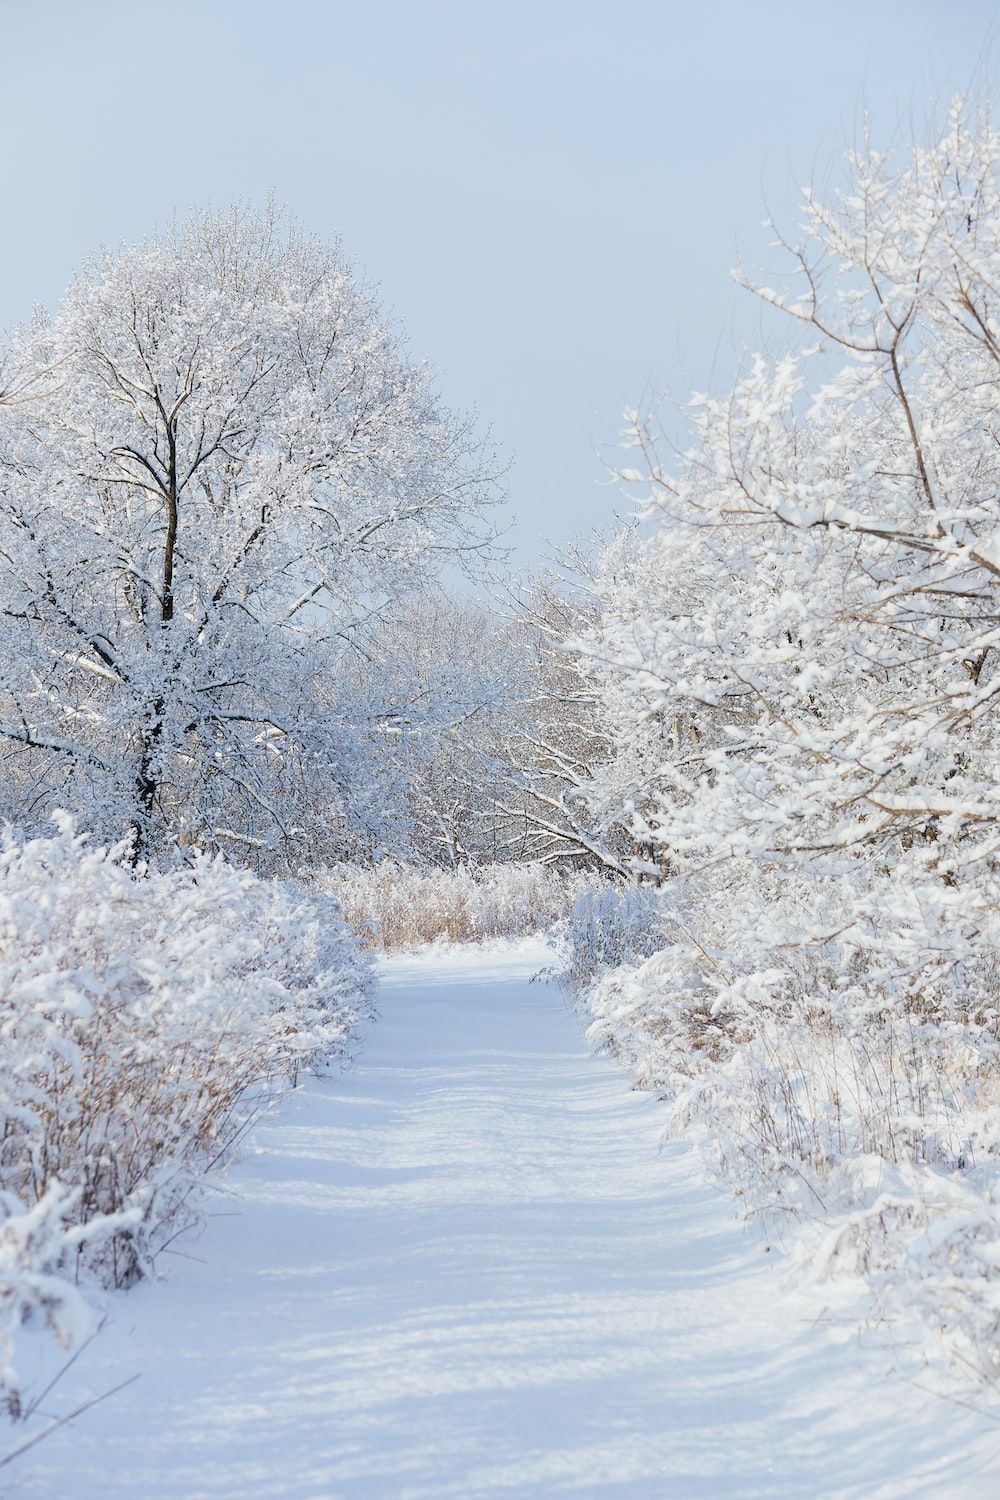 Winter Wallpaper Picture. Download Free Image